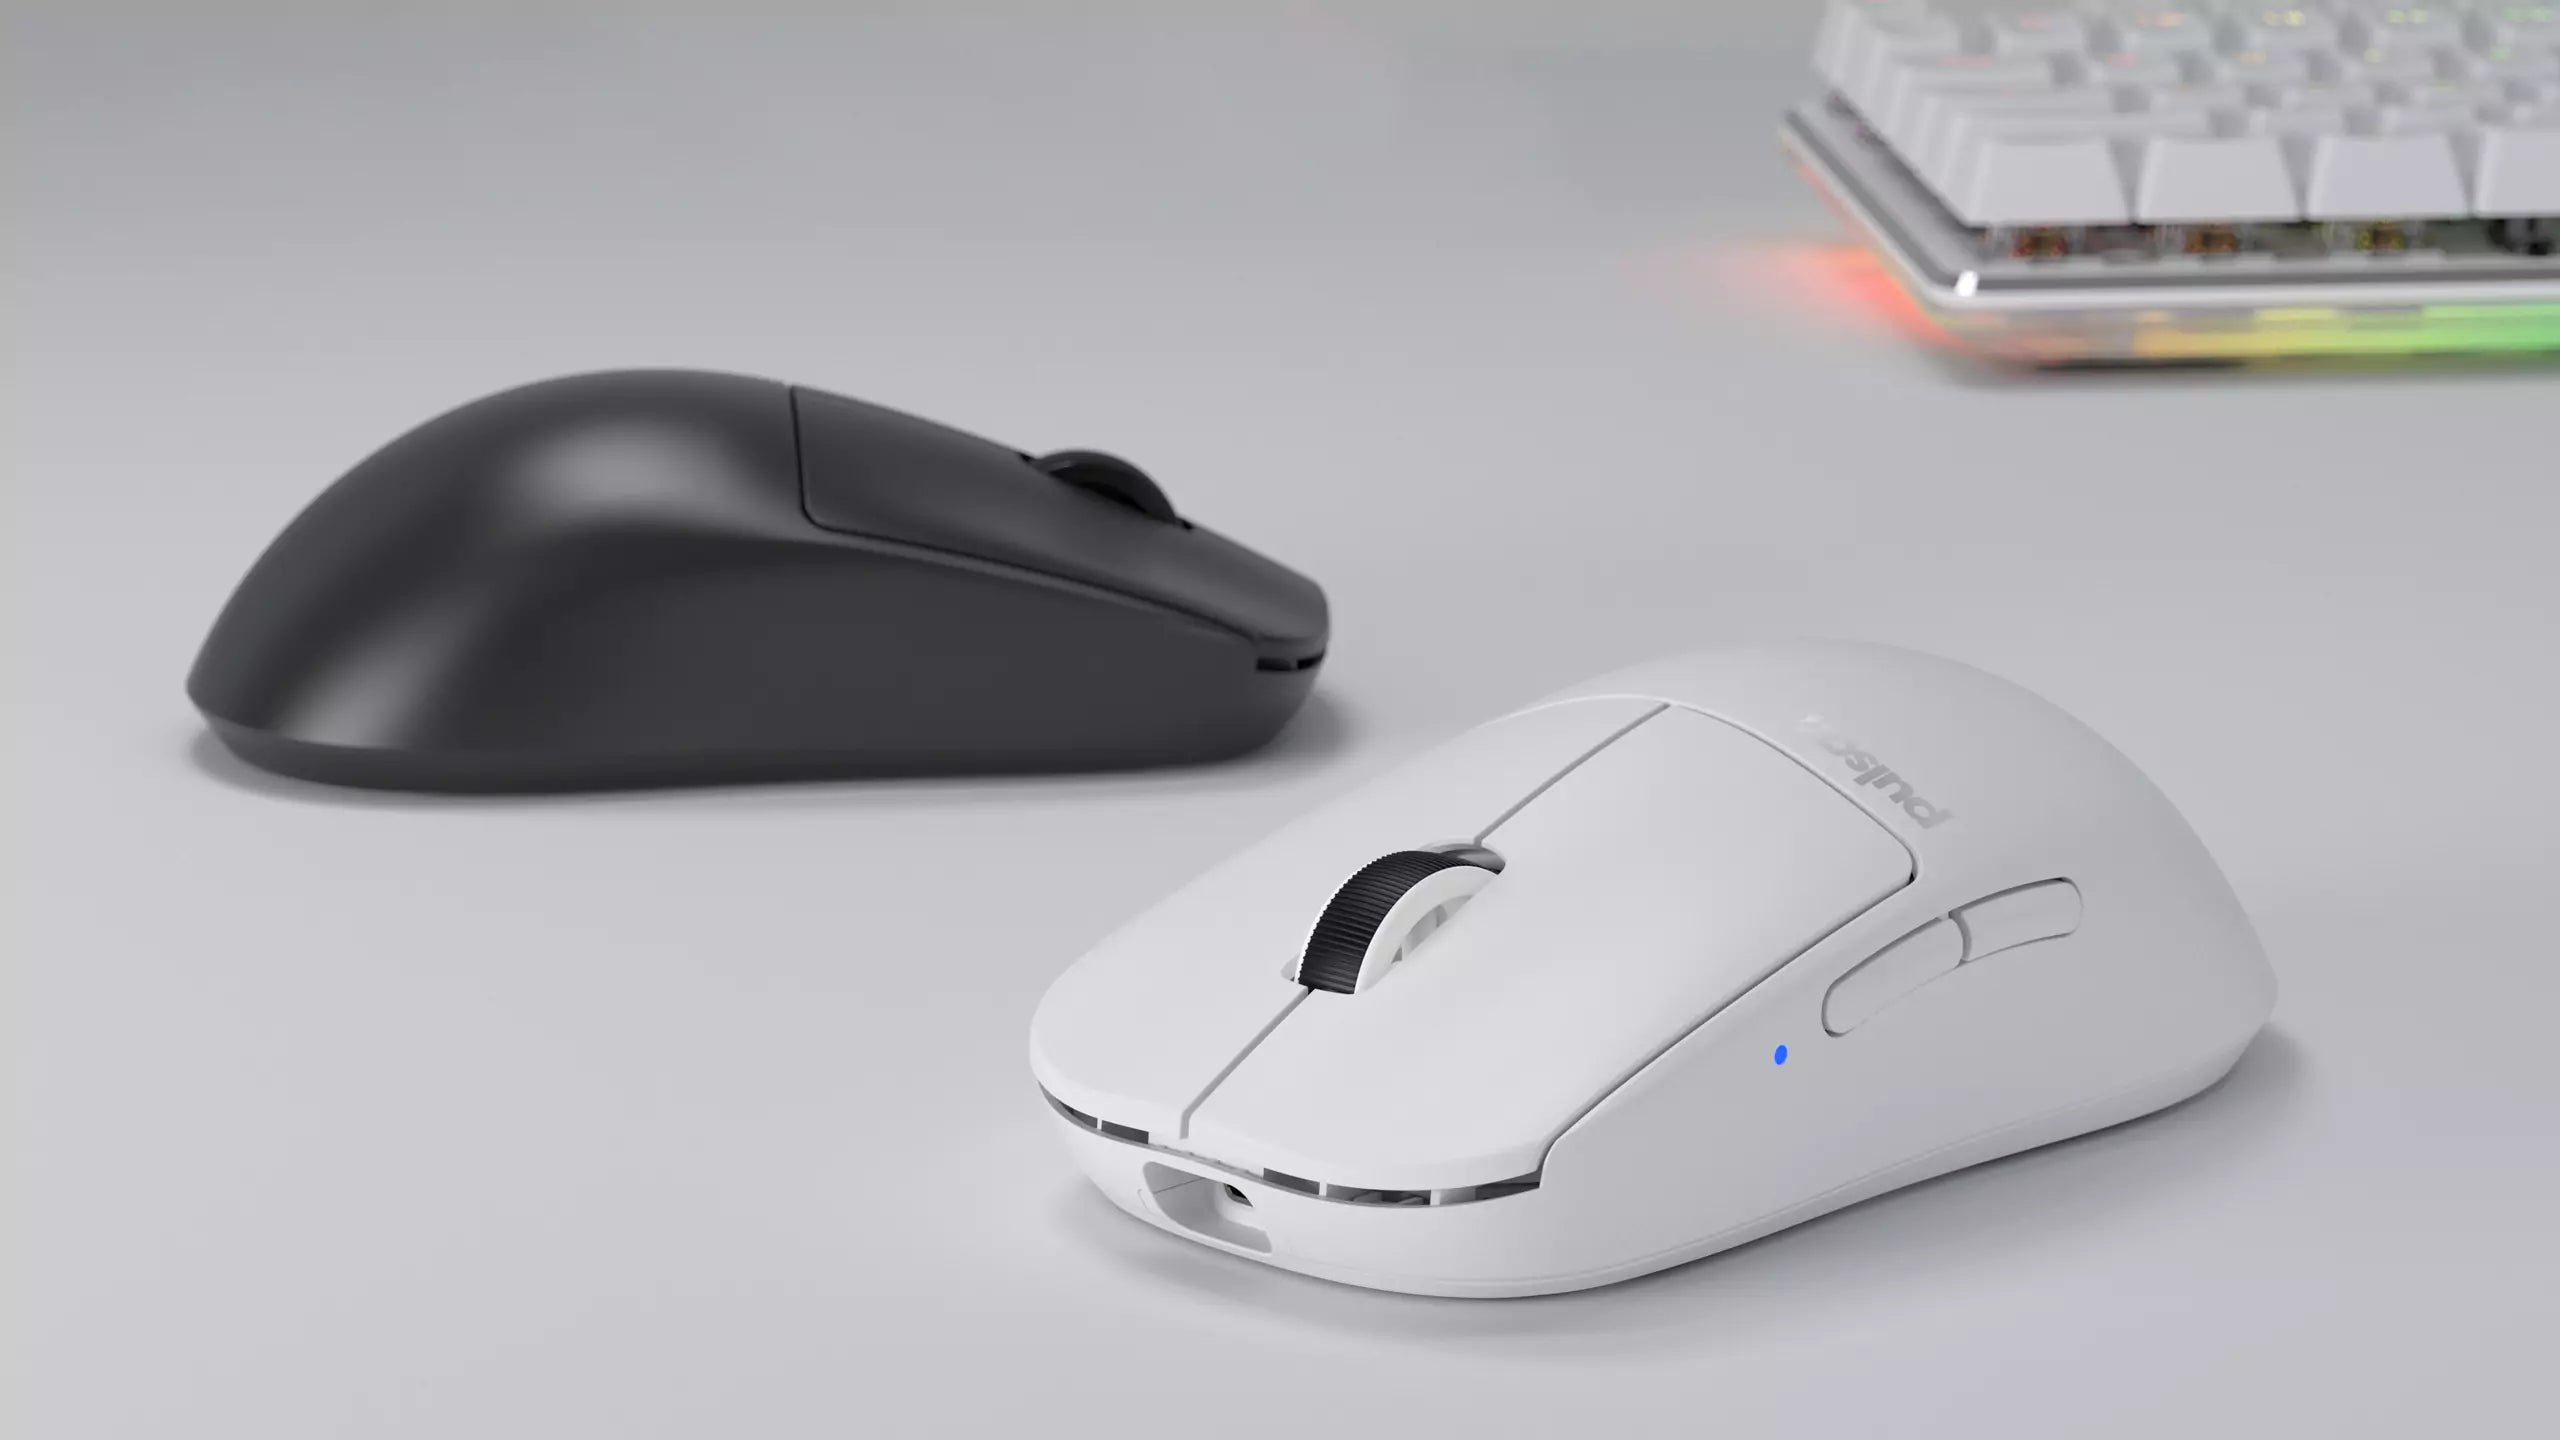 Founder's Edition] X2V2 Gaming Mouse – Pulsar Gaming Gears